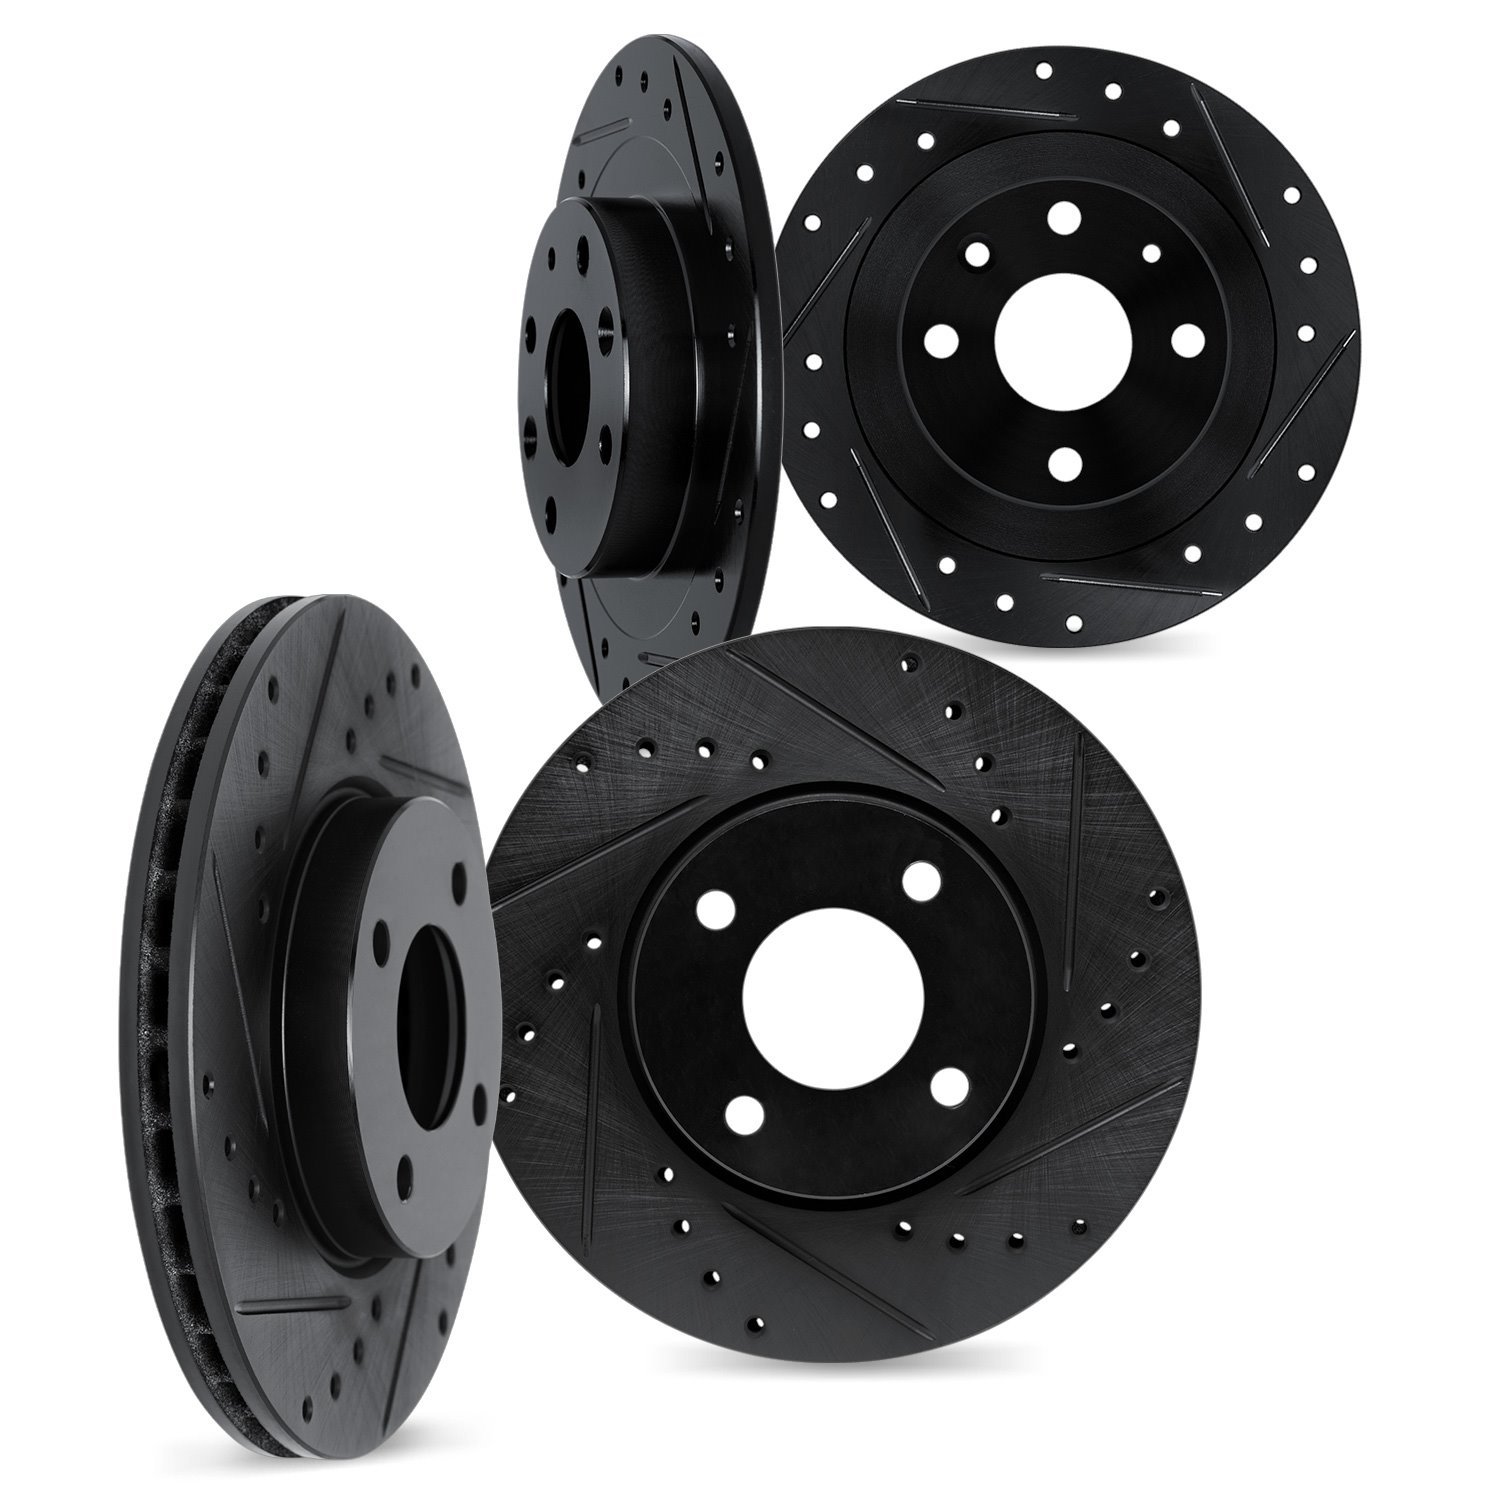 8004-67138 Drilled/Slotted Brake Rotors [Black], 1981-1981 Infiniti/Nissan, Position: Front and Rear